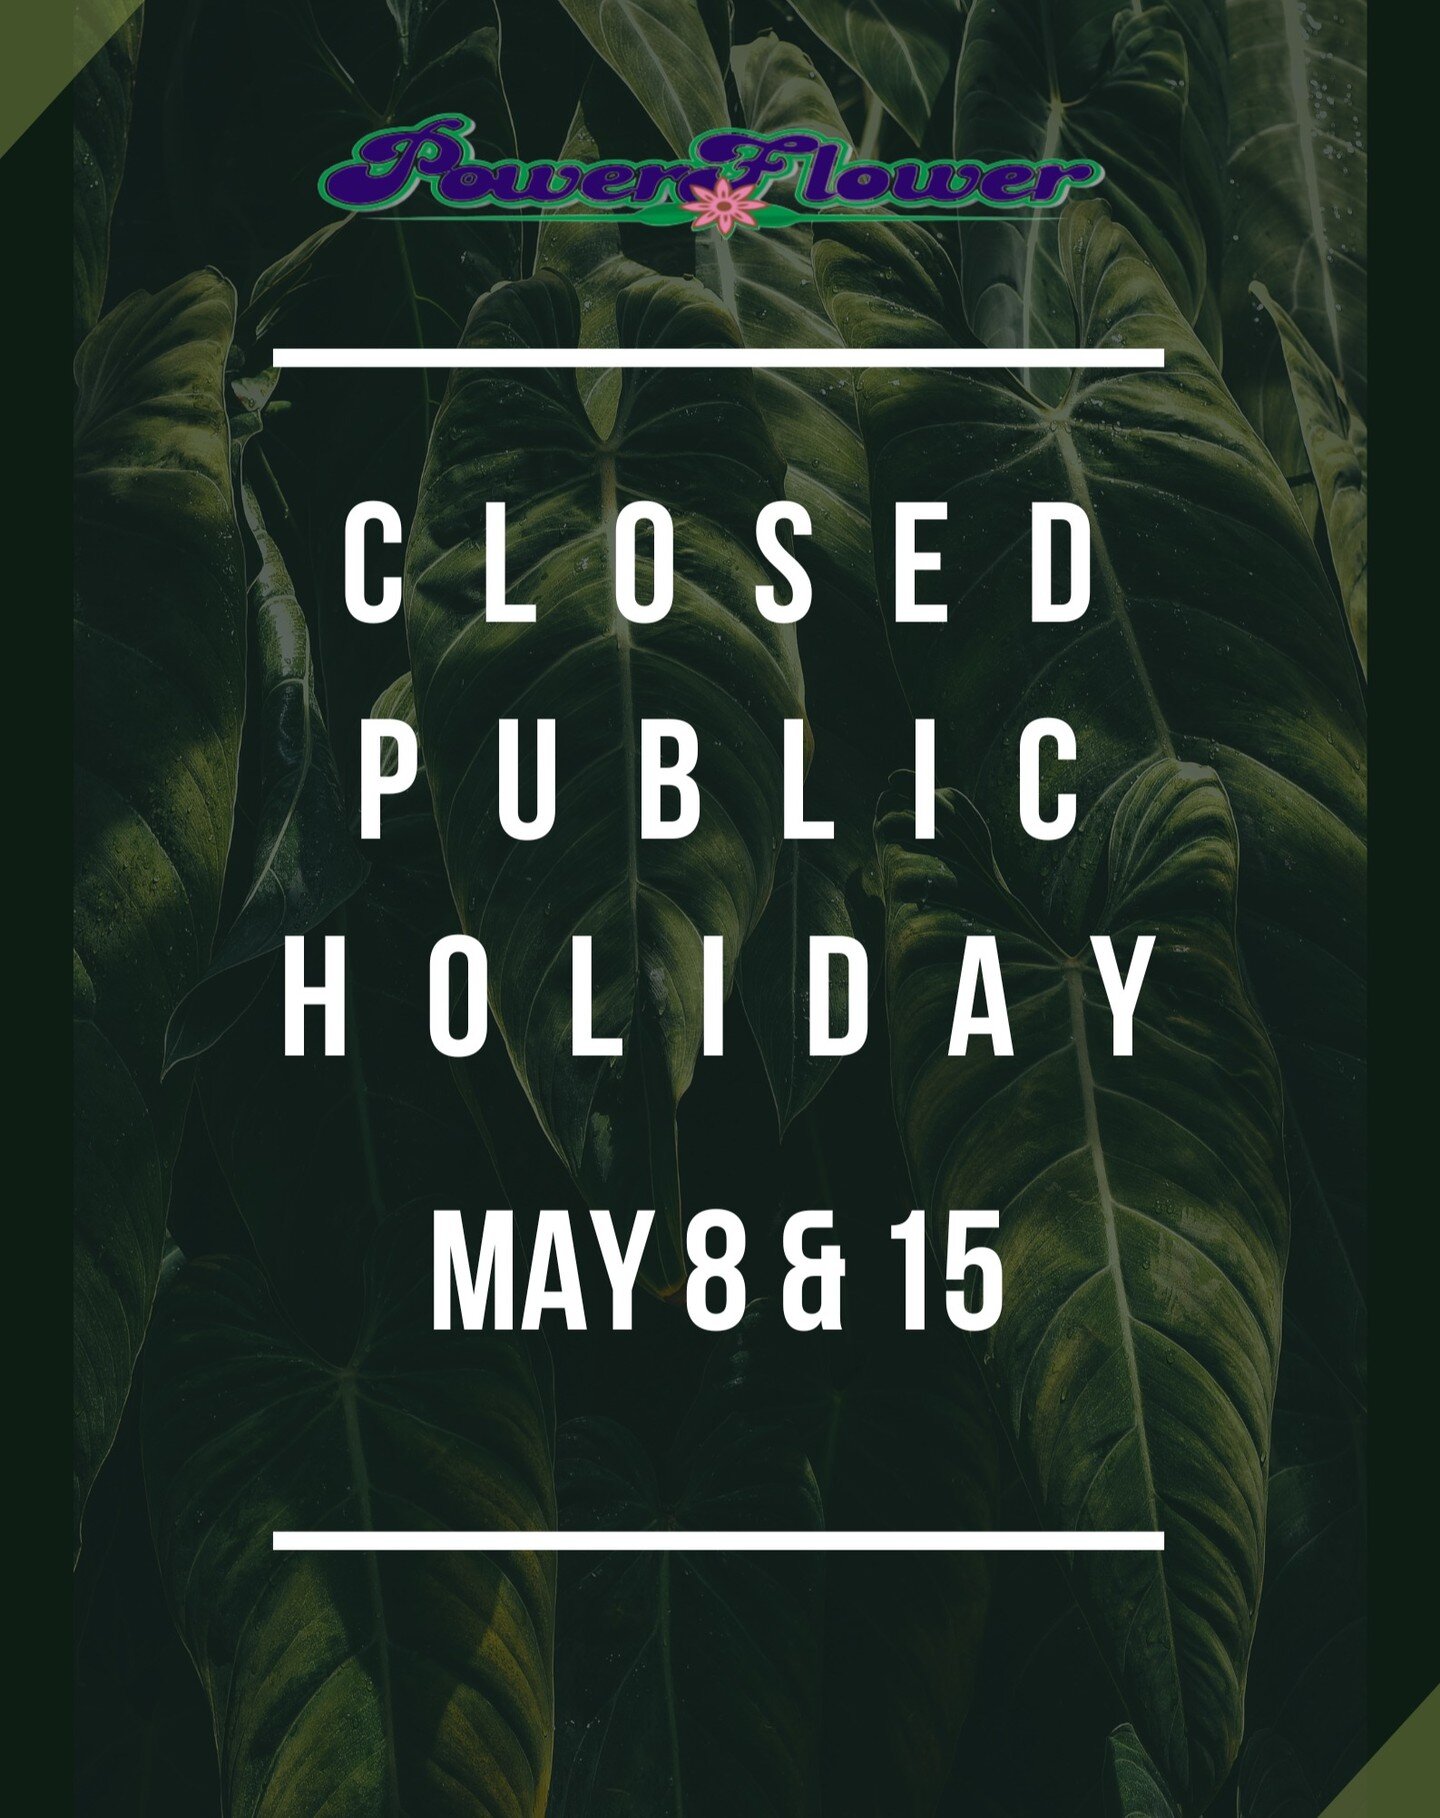 Please note that we will be closed to the public on May 8th and May 15th.